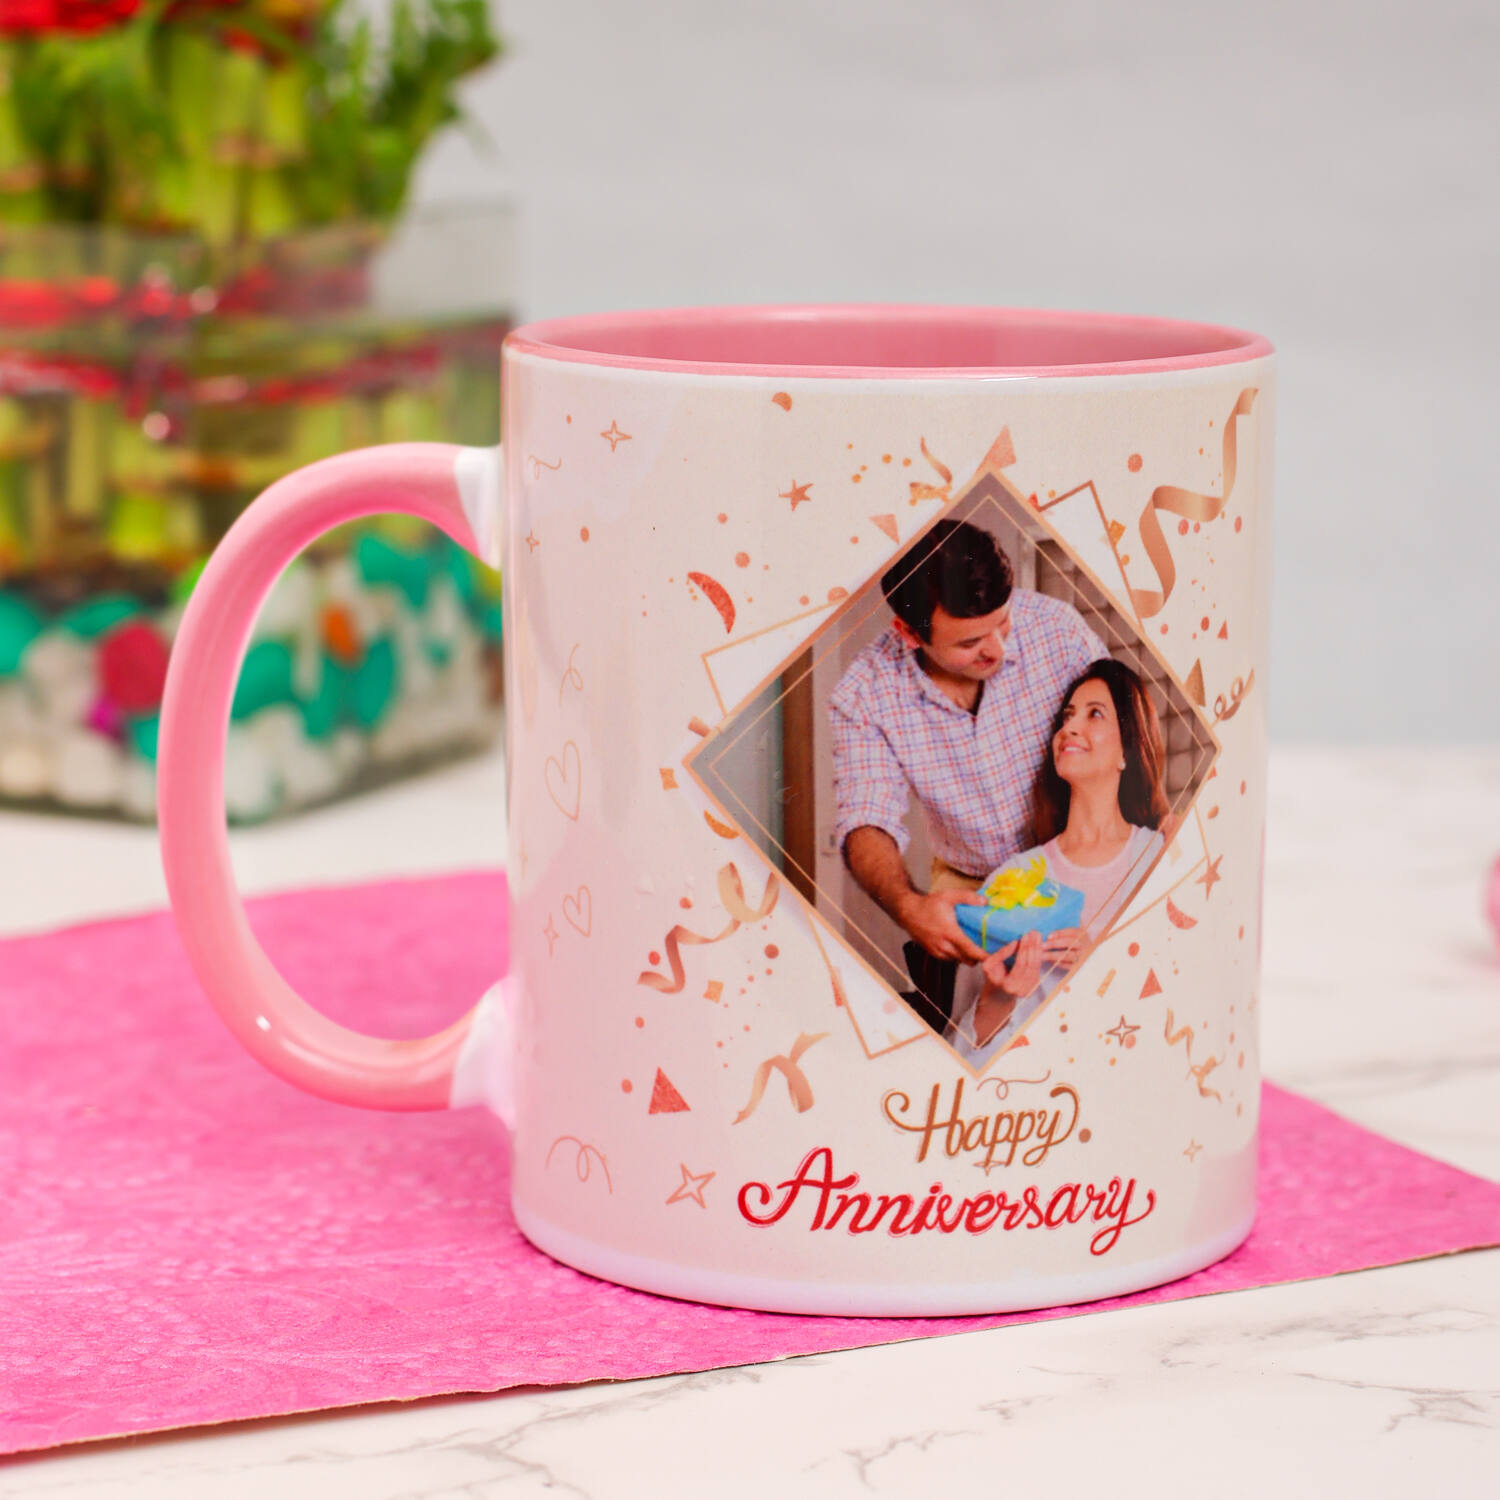 17+ Unique Anniversary Gifts Ideas for Husband